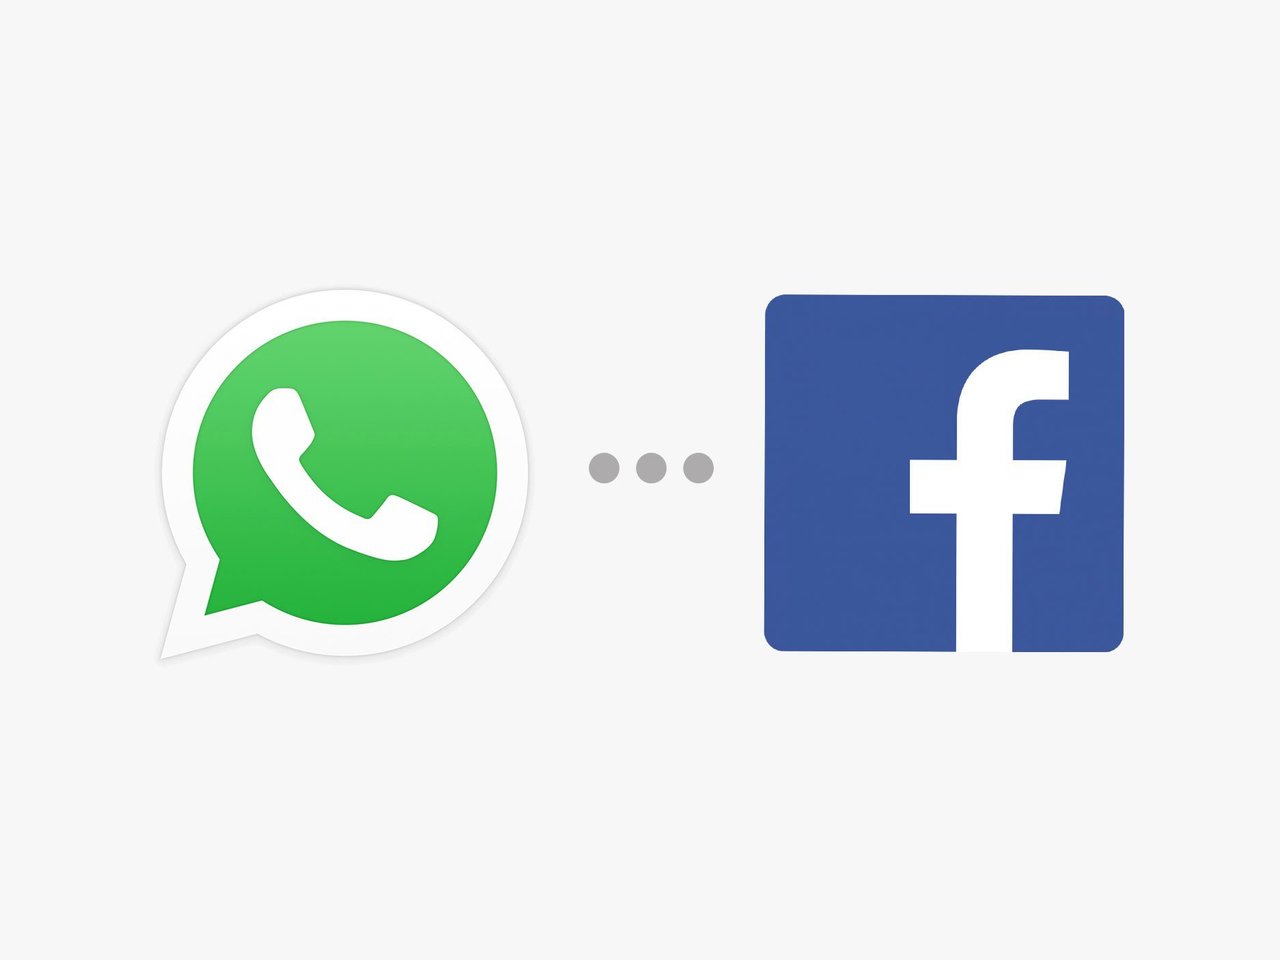 Facebook's crisis response tools get extended to WhatsApp